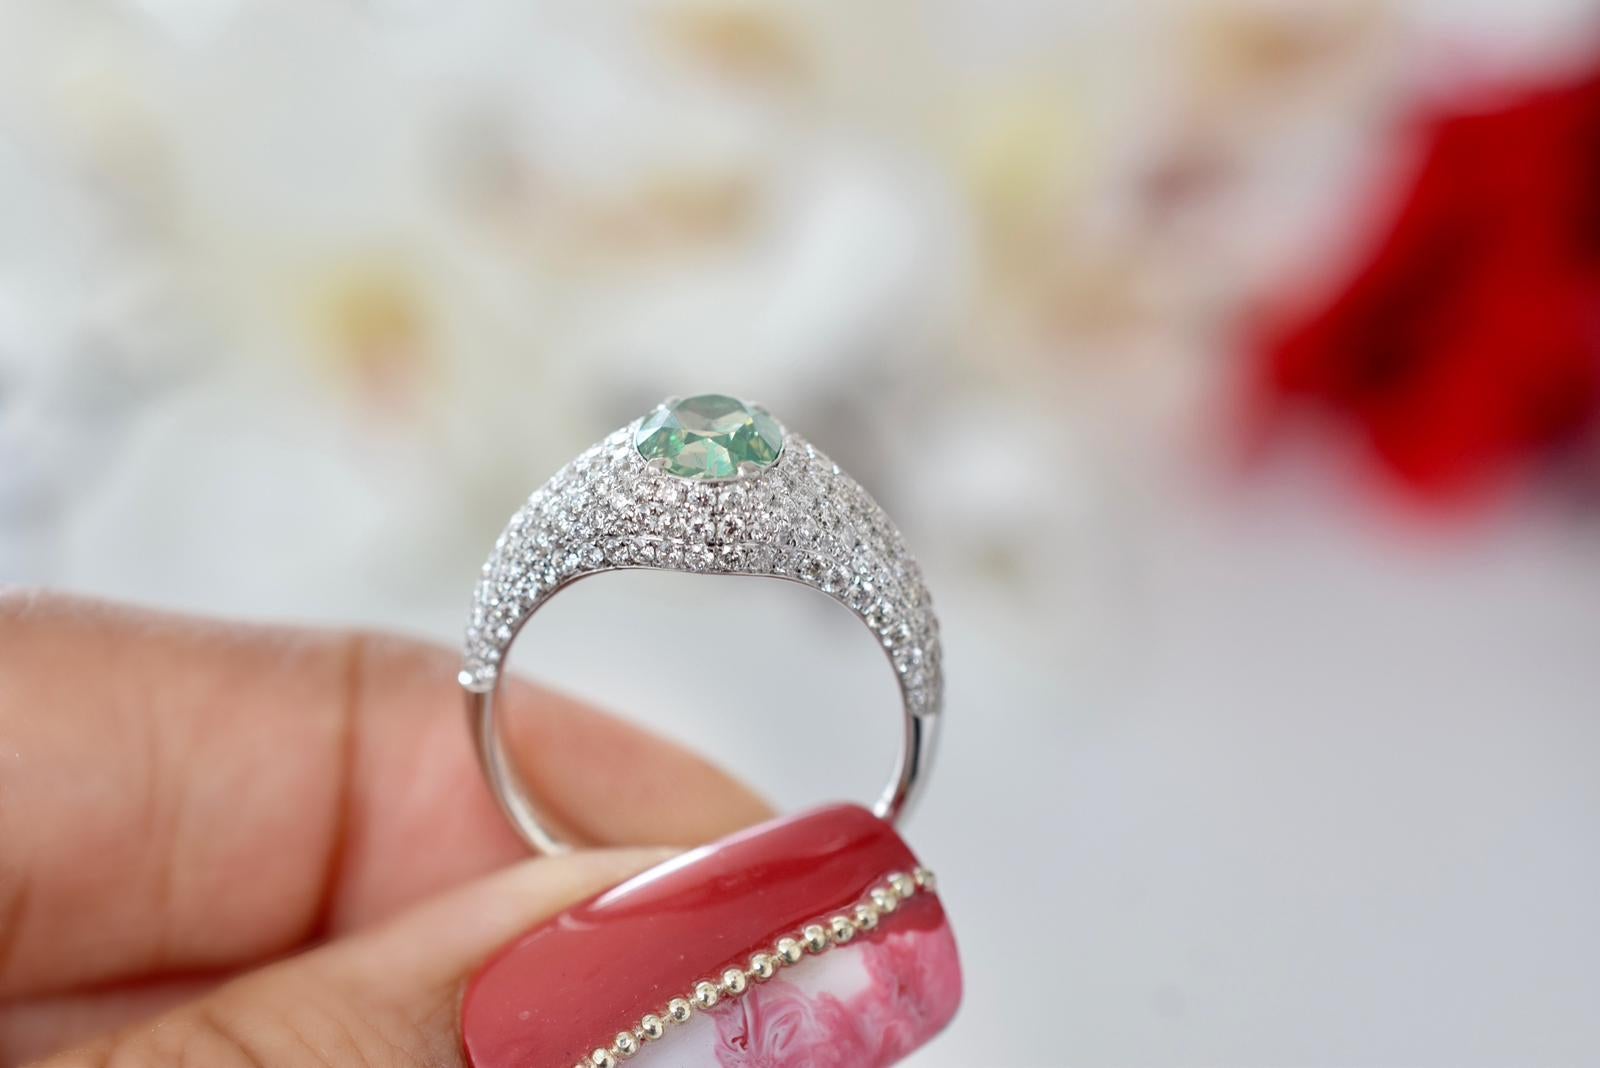 **100% NATURAL FANCY COLOUR DIAMOND JEWELLERIES**

✪ Jewelry Details ✪

♦ MAIN STONE DETAILS

➛ Stone Shape: Oval 
➛ Stone Color: Fancy Green Yellow
➛ Stone Weight: 1.52 carats
➛ Clarity: I1
➛ GIA certified

♦ SIDE STONE DETAILS

➛ Side White